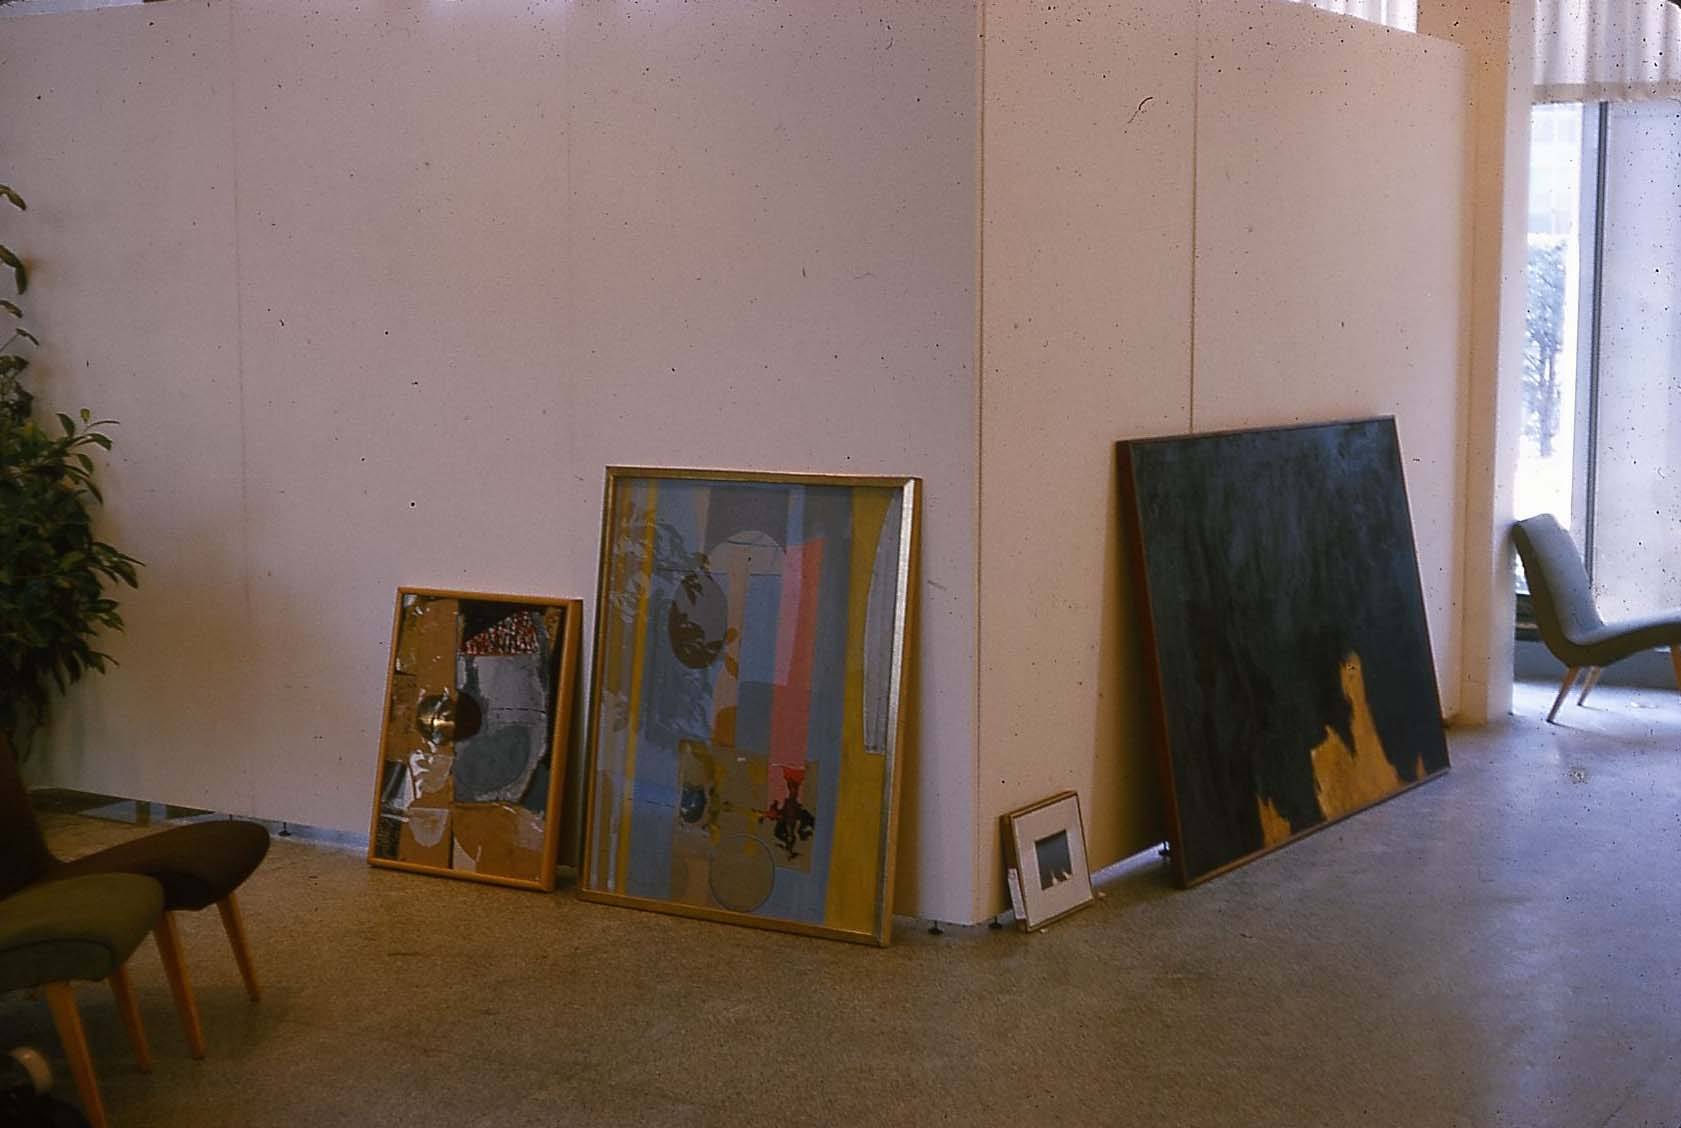 Installation view of Robert Motherwell at the New Gallery, Hayden Library, Massachusetts Institute of Technology, Cambridge,including Mallarmé’s Swan and Iberia No. 2